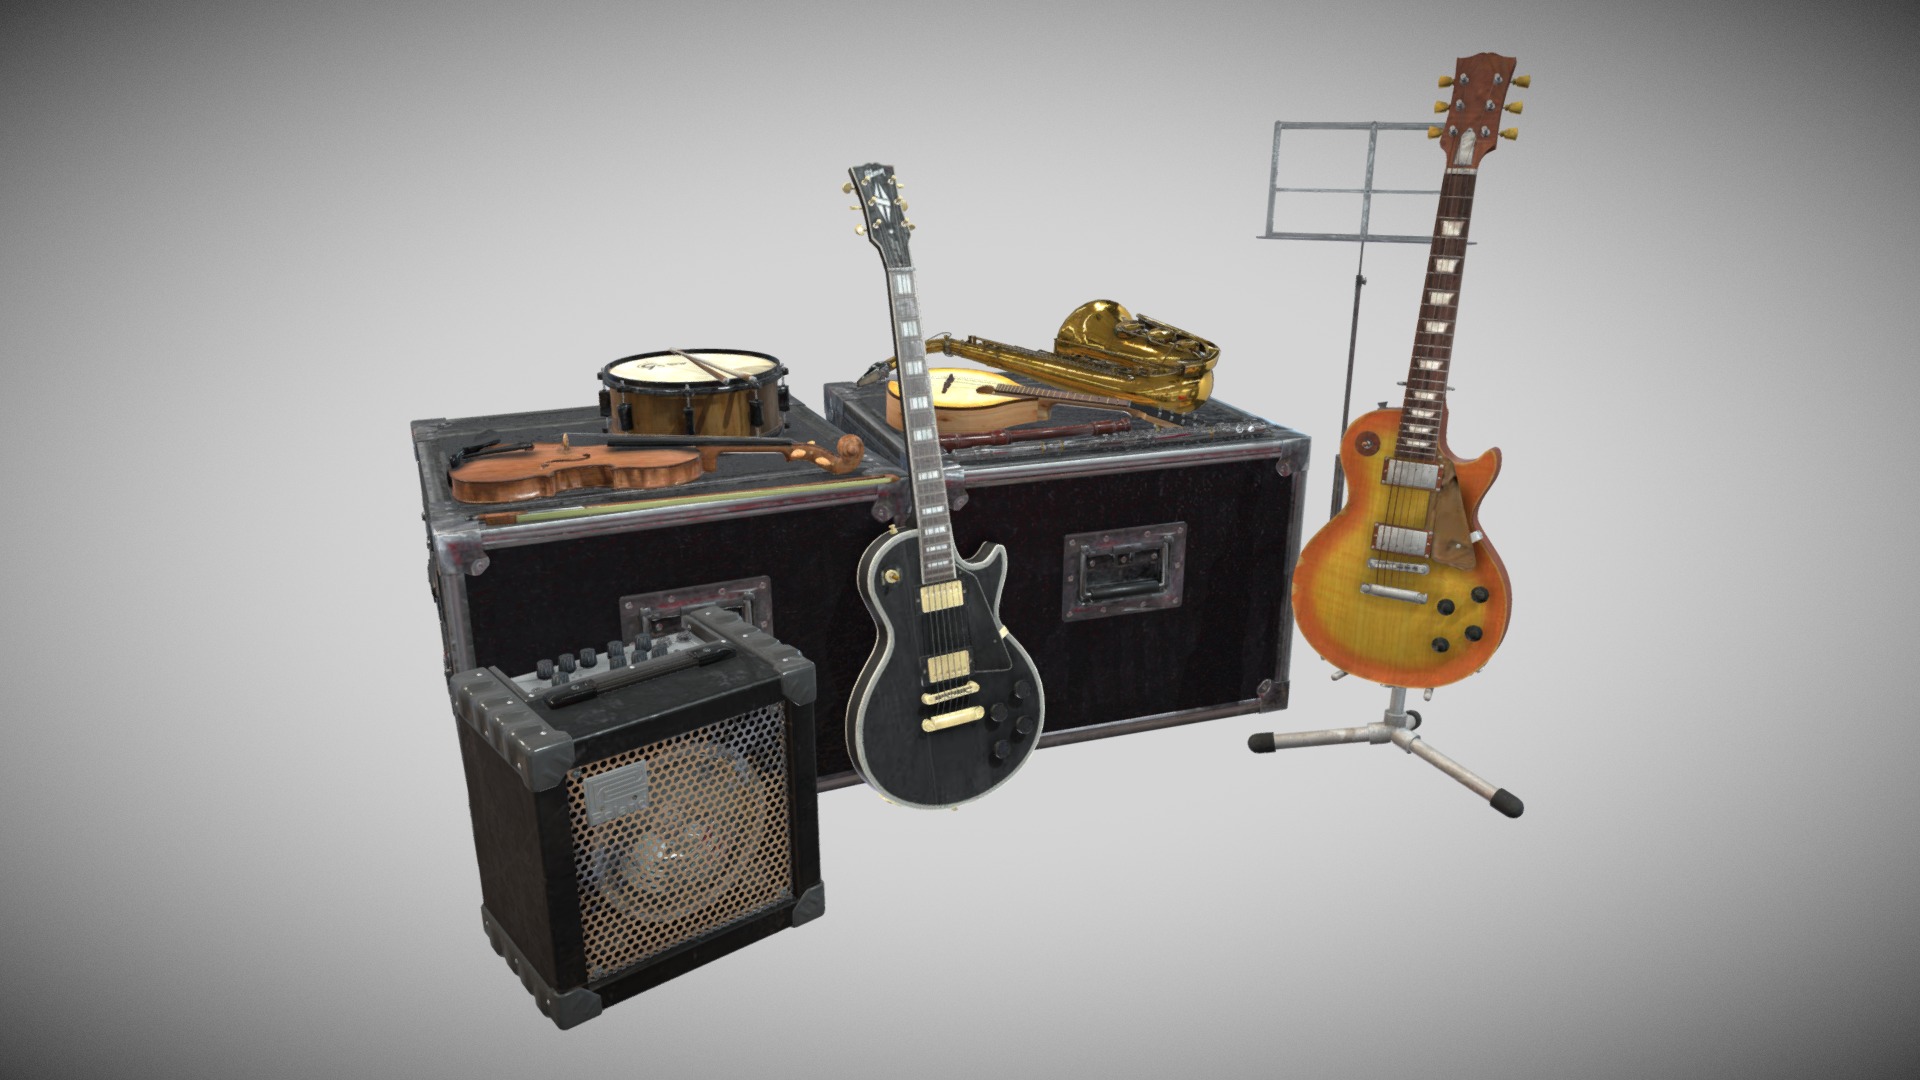 3D model Musical Instruments Group – One Material - This is a 3D model of the Musical Instruments Group - One Material. The 3D model is about a black and gold electric guitar.